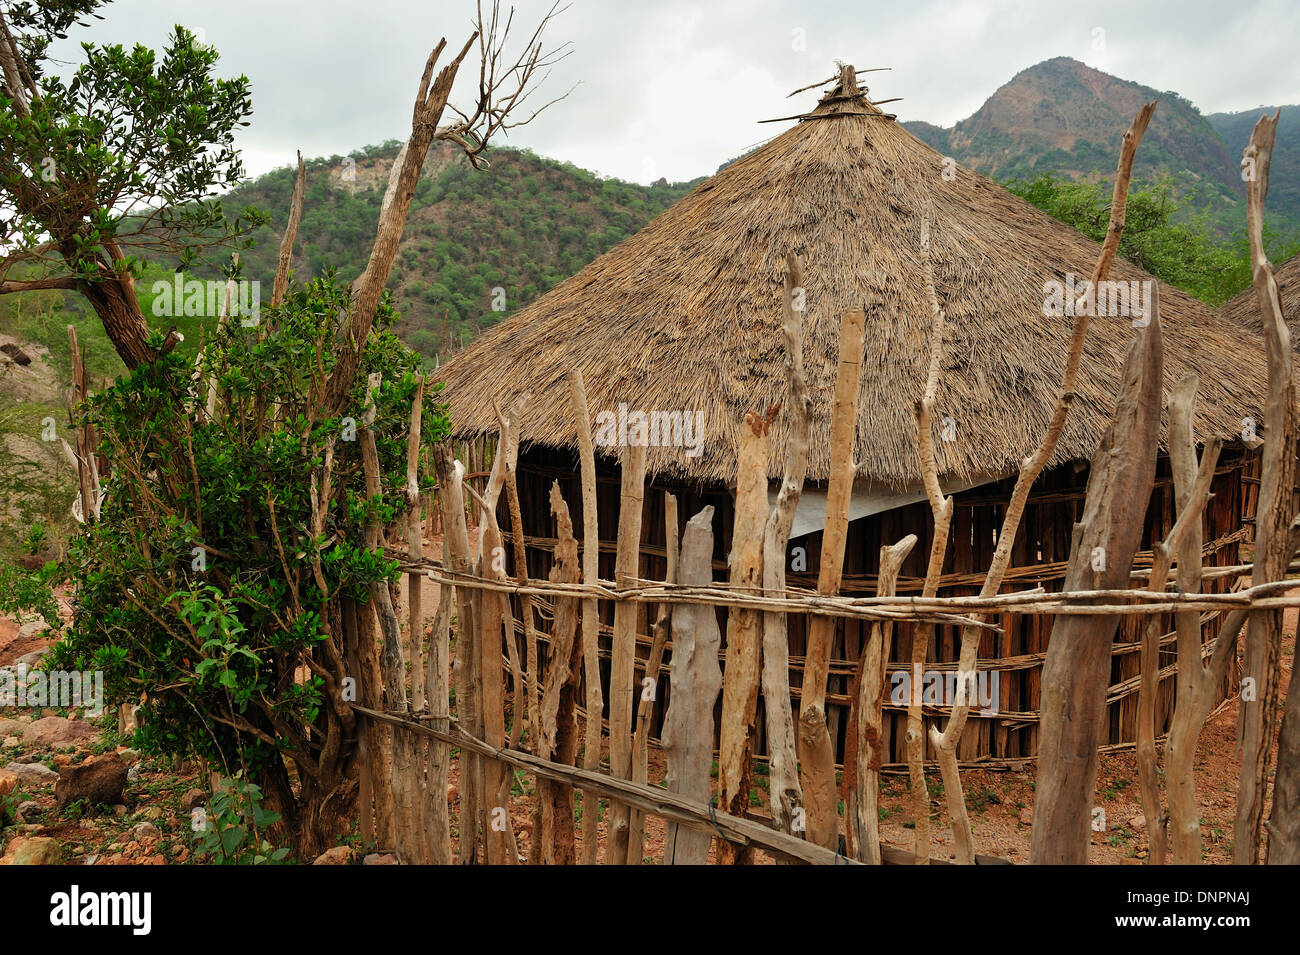 Typical rounded Djiboutian huts in a village in the Day forest in Djibouti, Horn of Africa Stock Photo